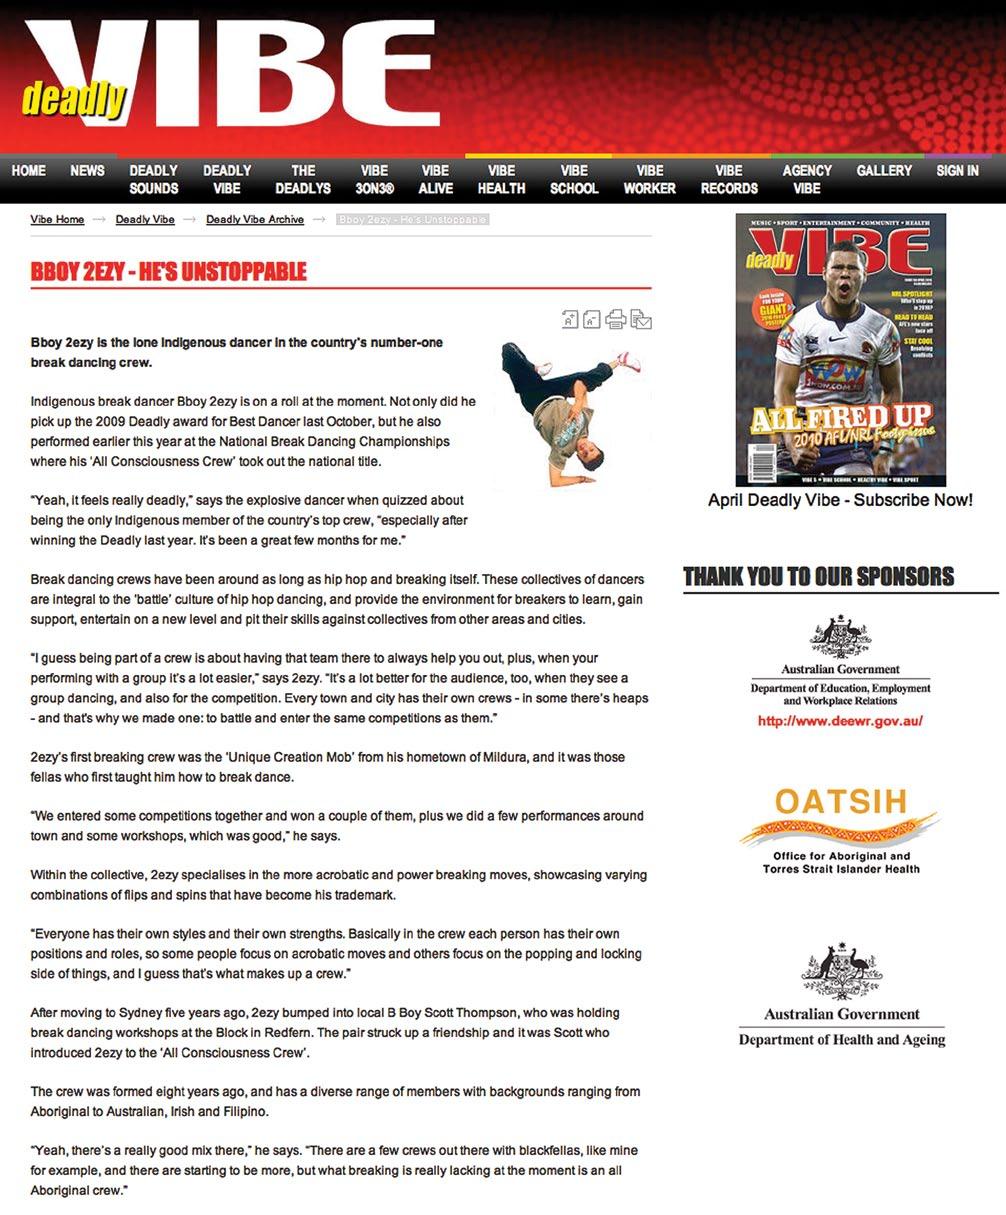 n Reading web pages This is an online magazine article about an Indigenous dancer, Bboy 2ezy. Features of the web page are labelled.